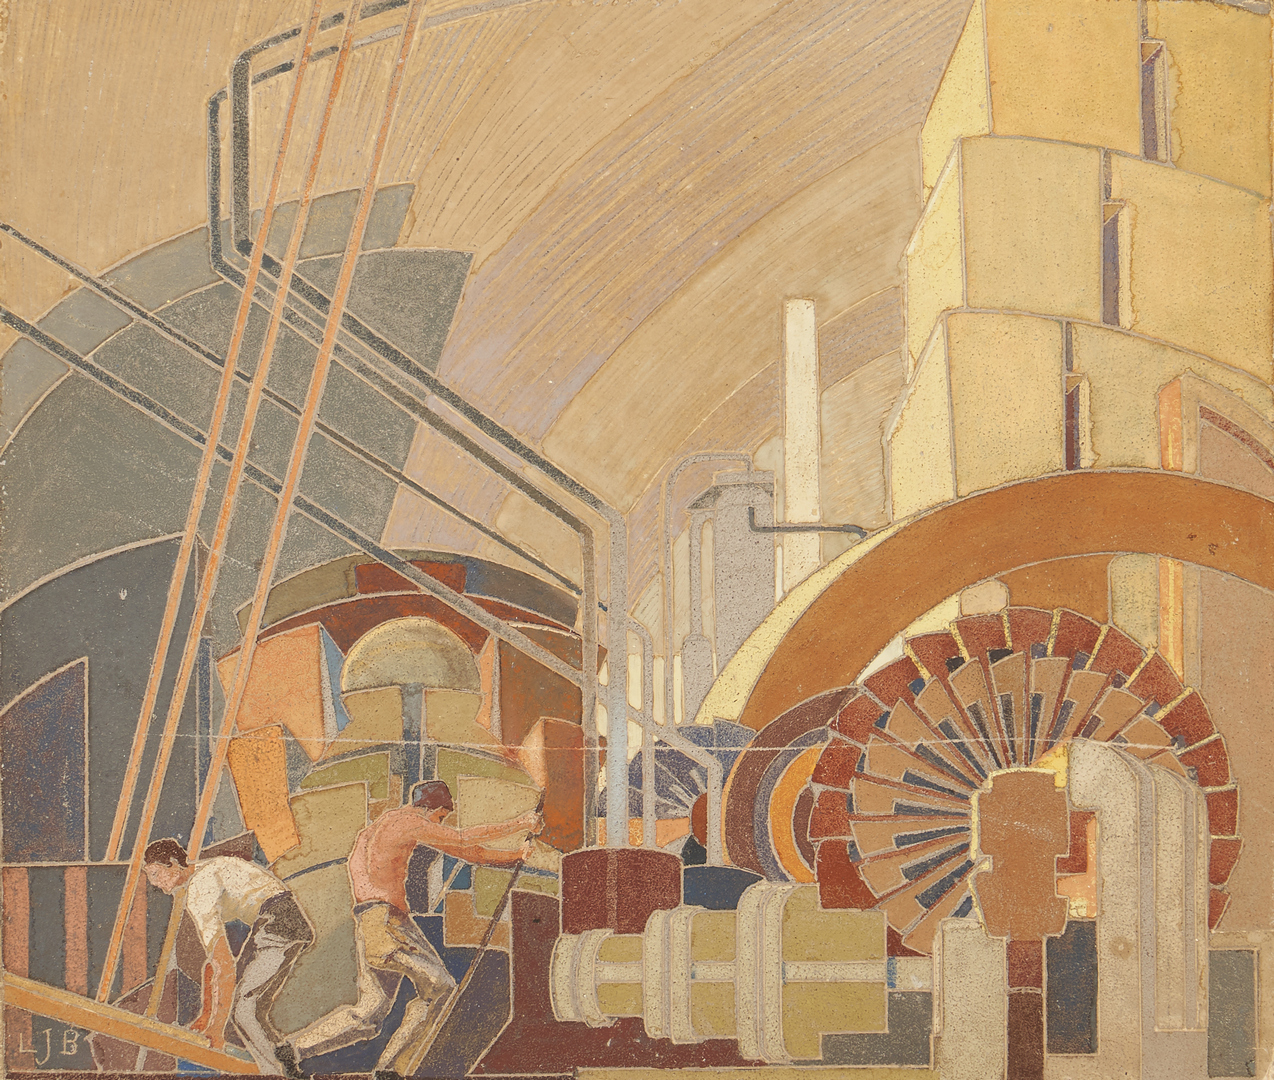 Lot 806: Lewis Borgo Industrial Painting, possible Mural Study